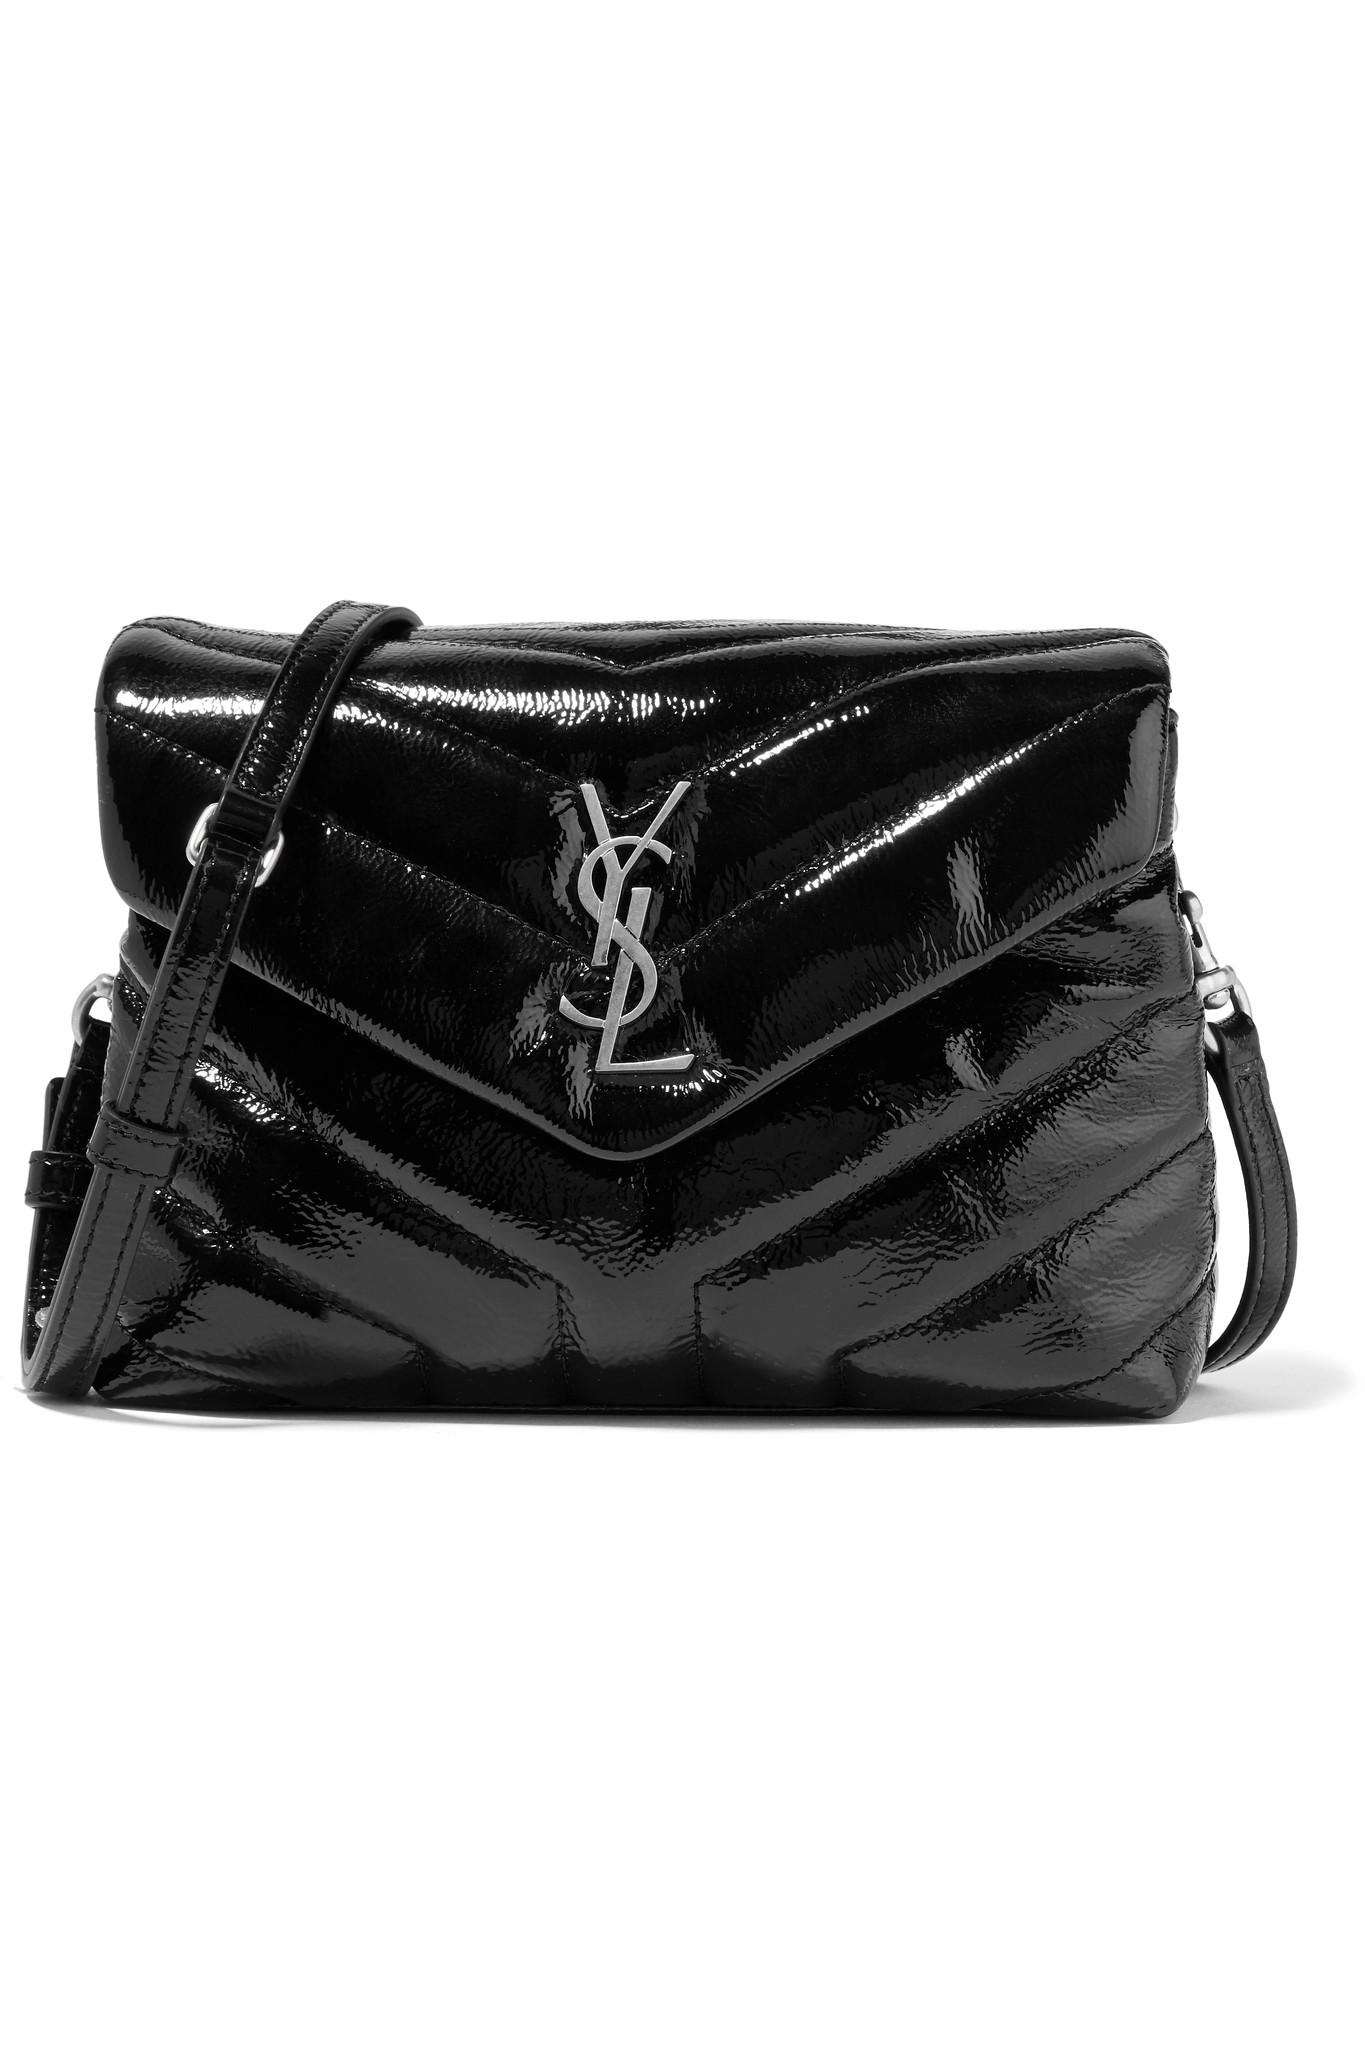 Lyst - Saint Laurent Loulou Small Quilted Patent-leather Shoulder Bag in Black